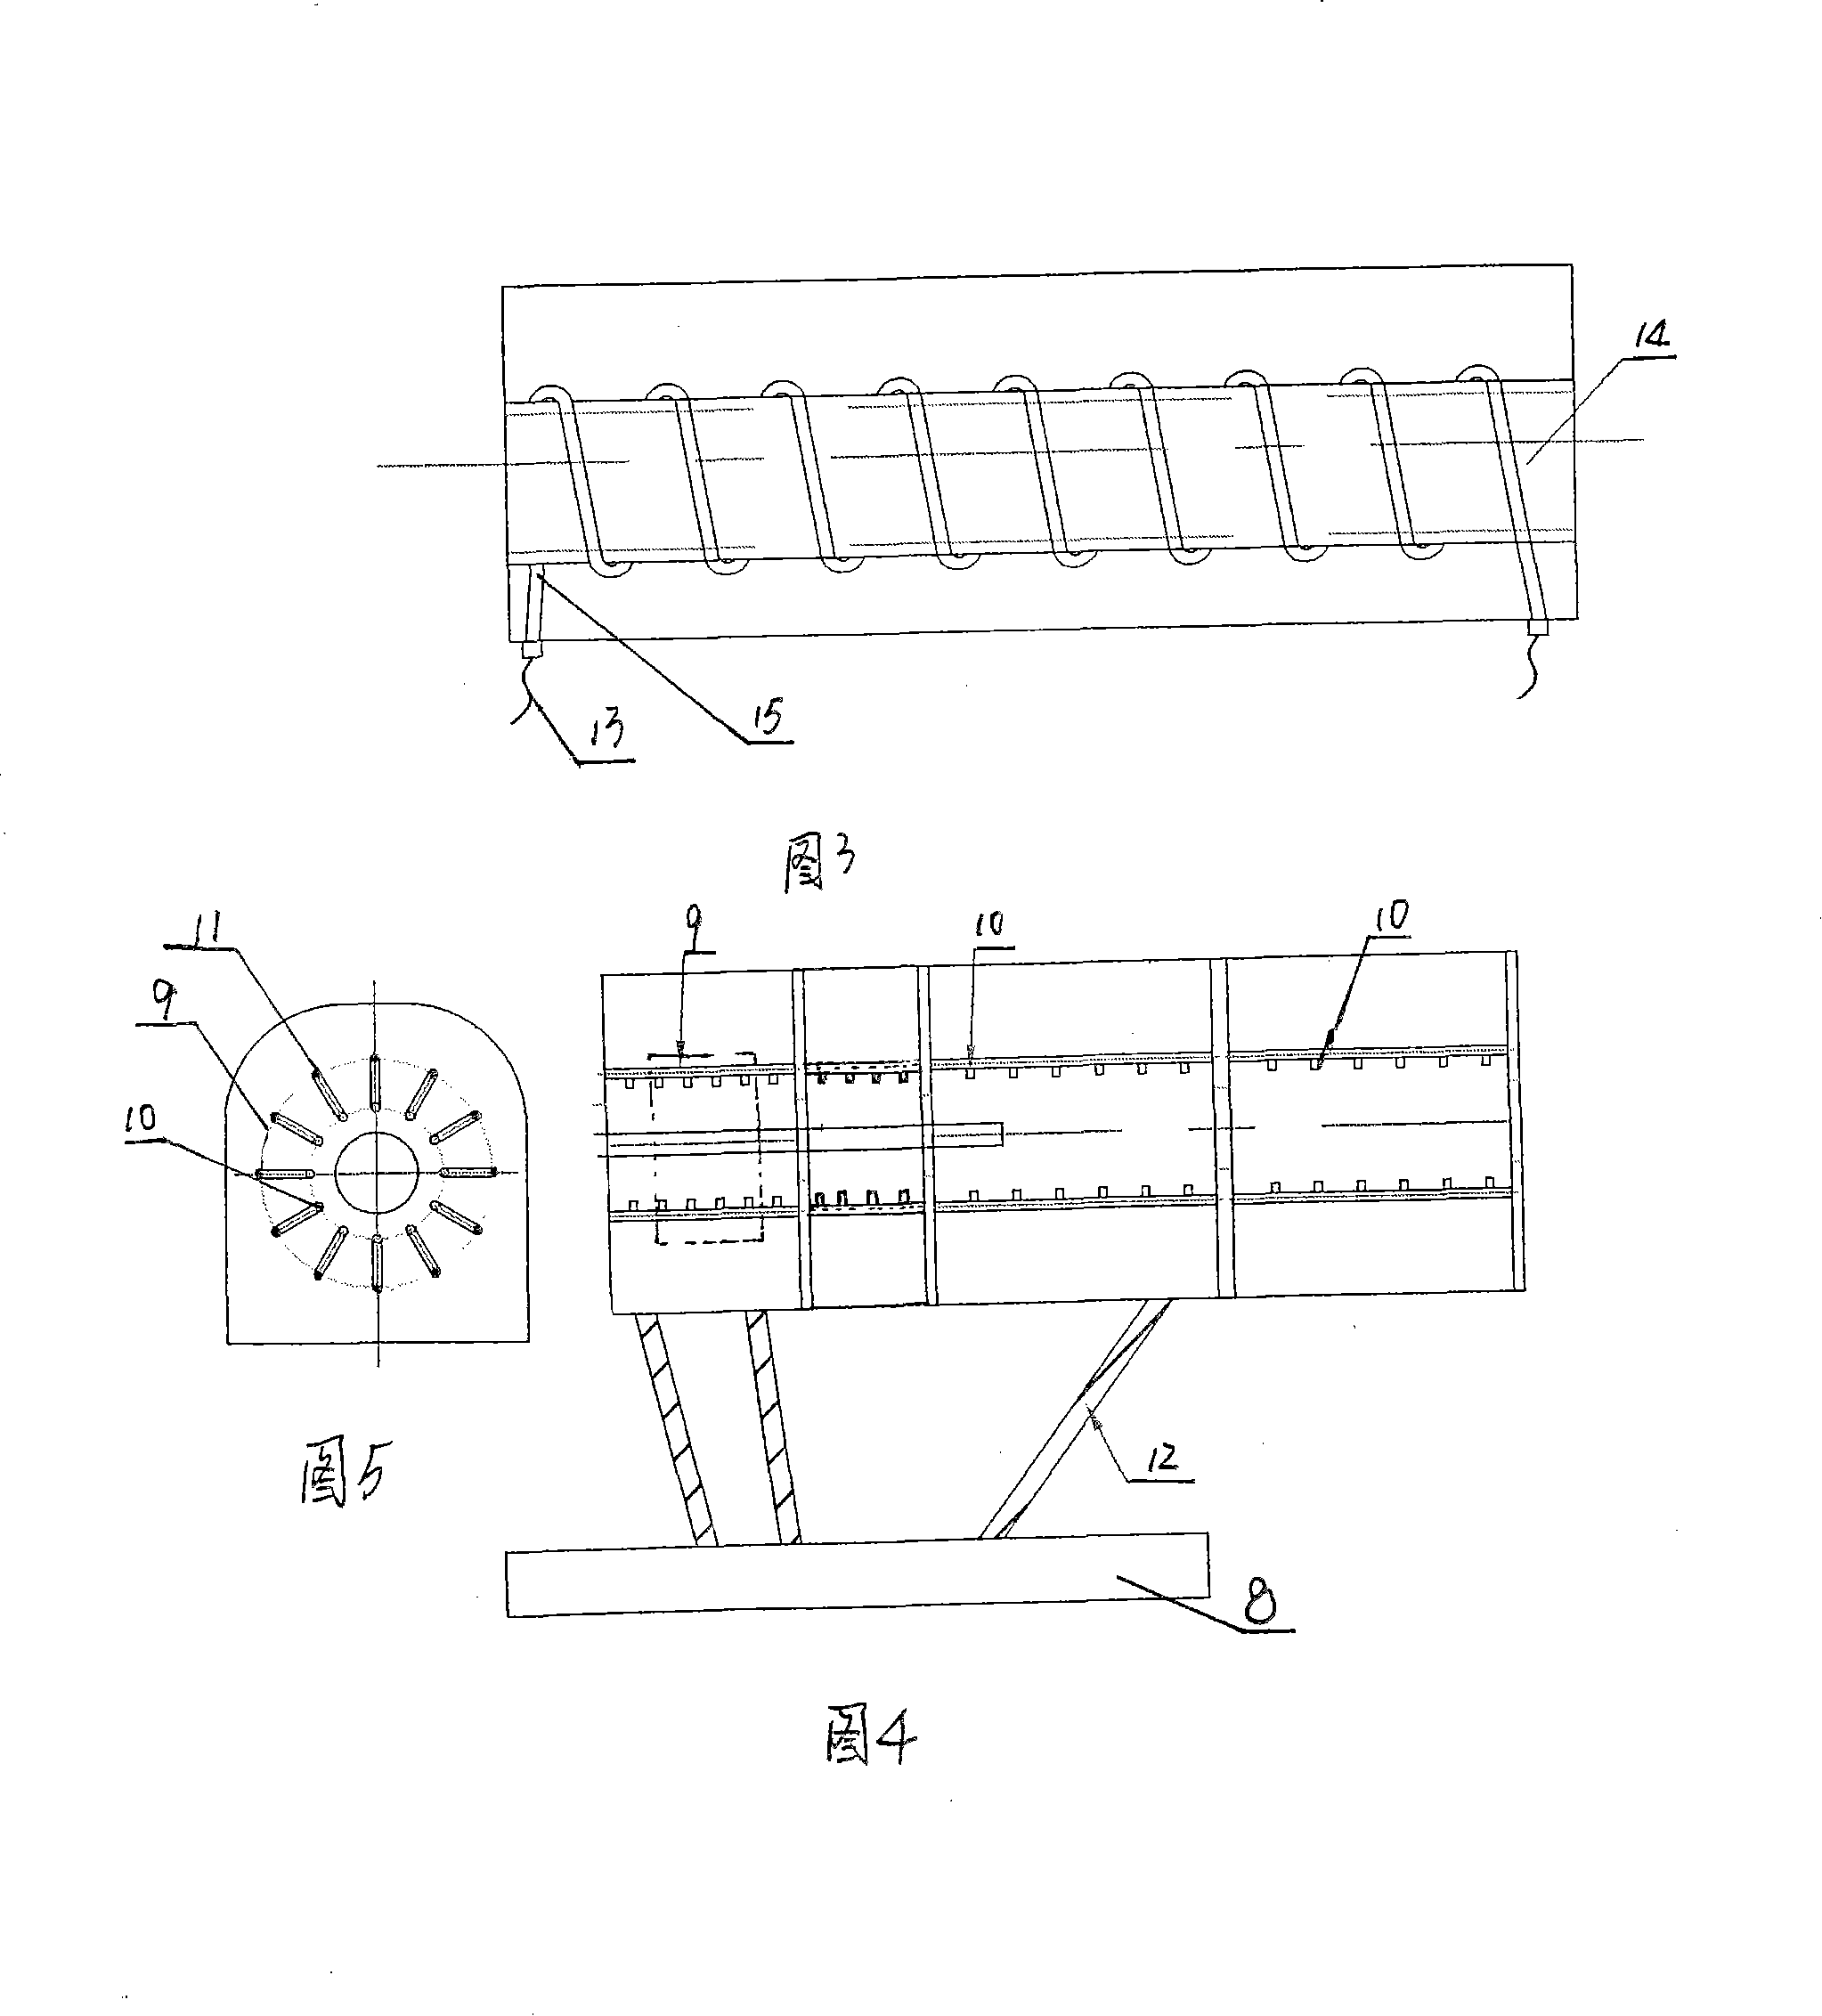 Oil tube electrical heat quenching and tempering thermal treatment method and apparatus